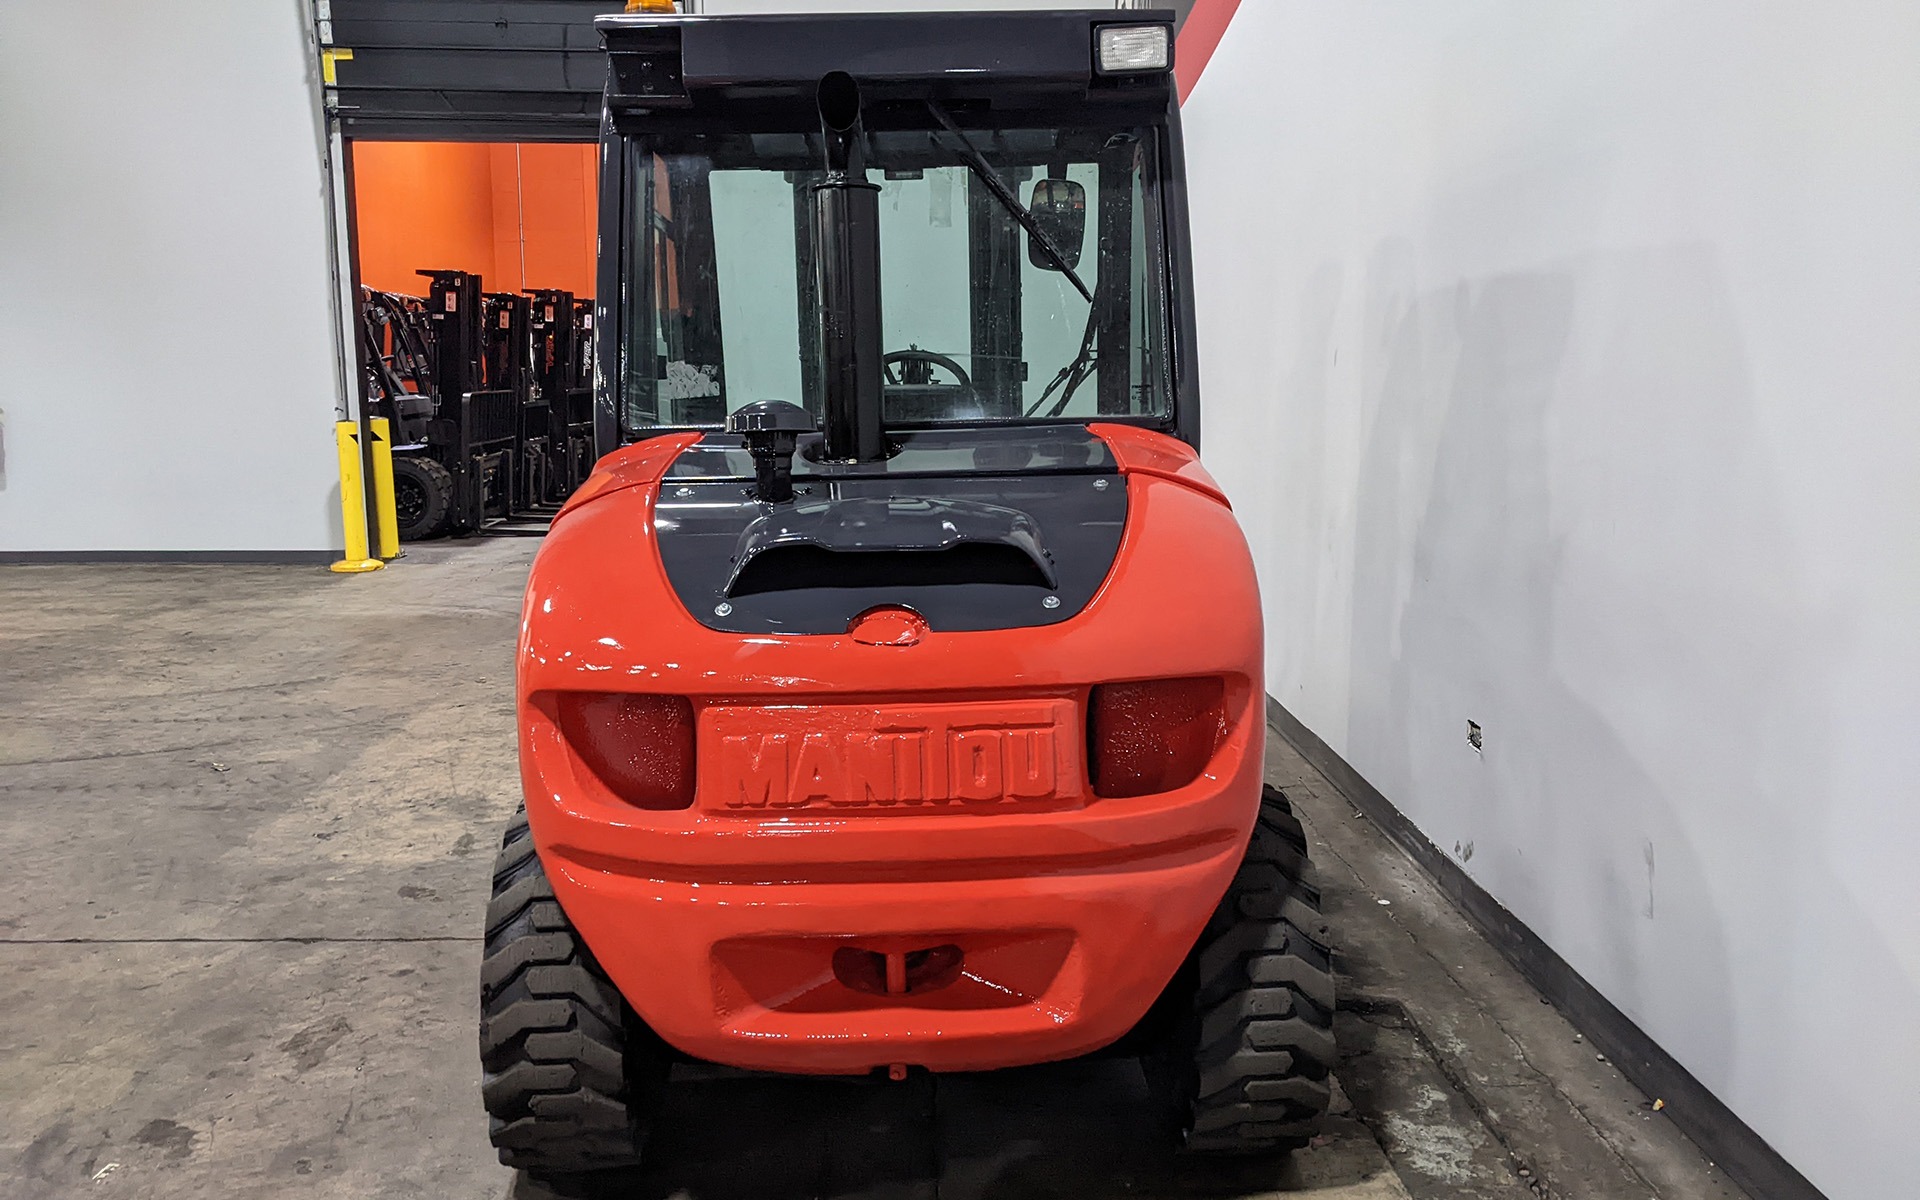 Used 2008 MANITOU MH25-4  | Cary, IL